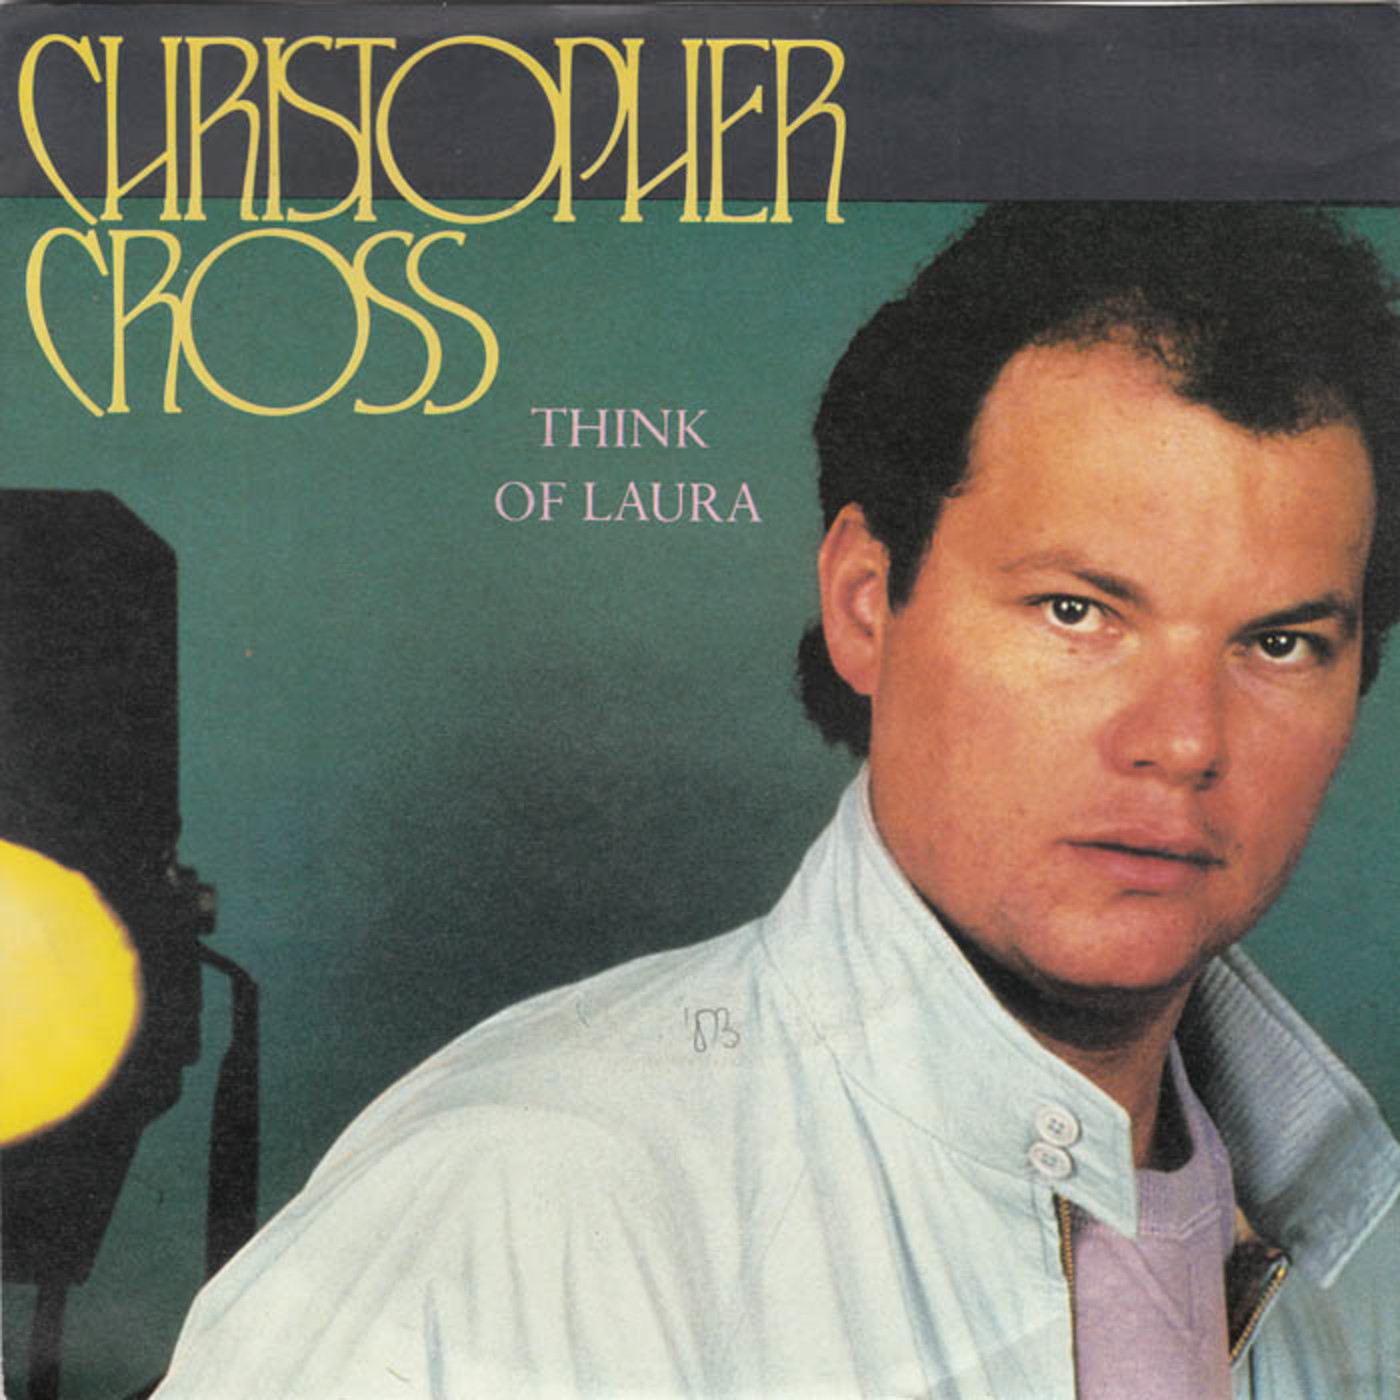 Christopher cross - all right - KYLE REESE - Podcast en iVoox.